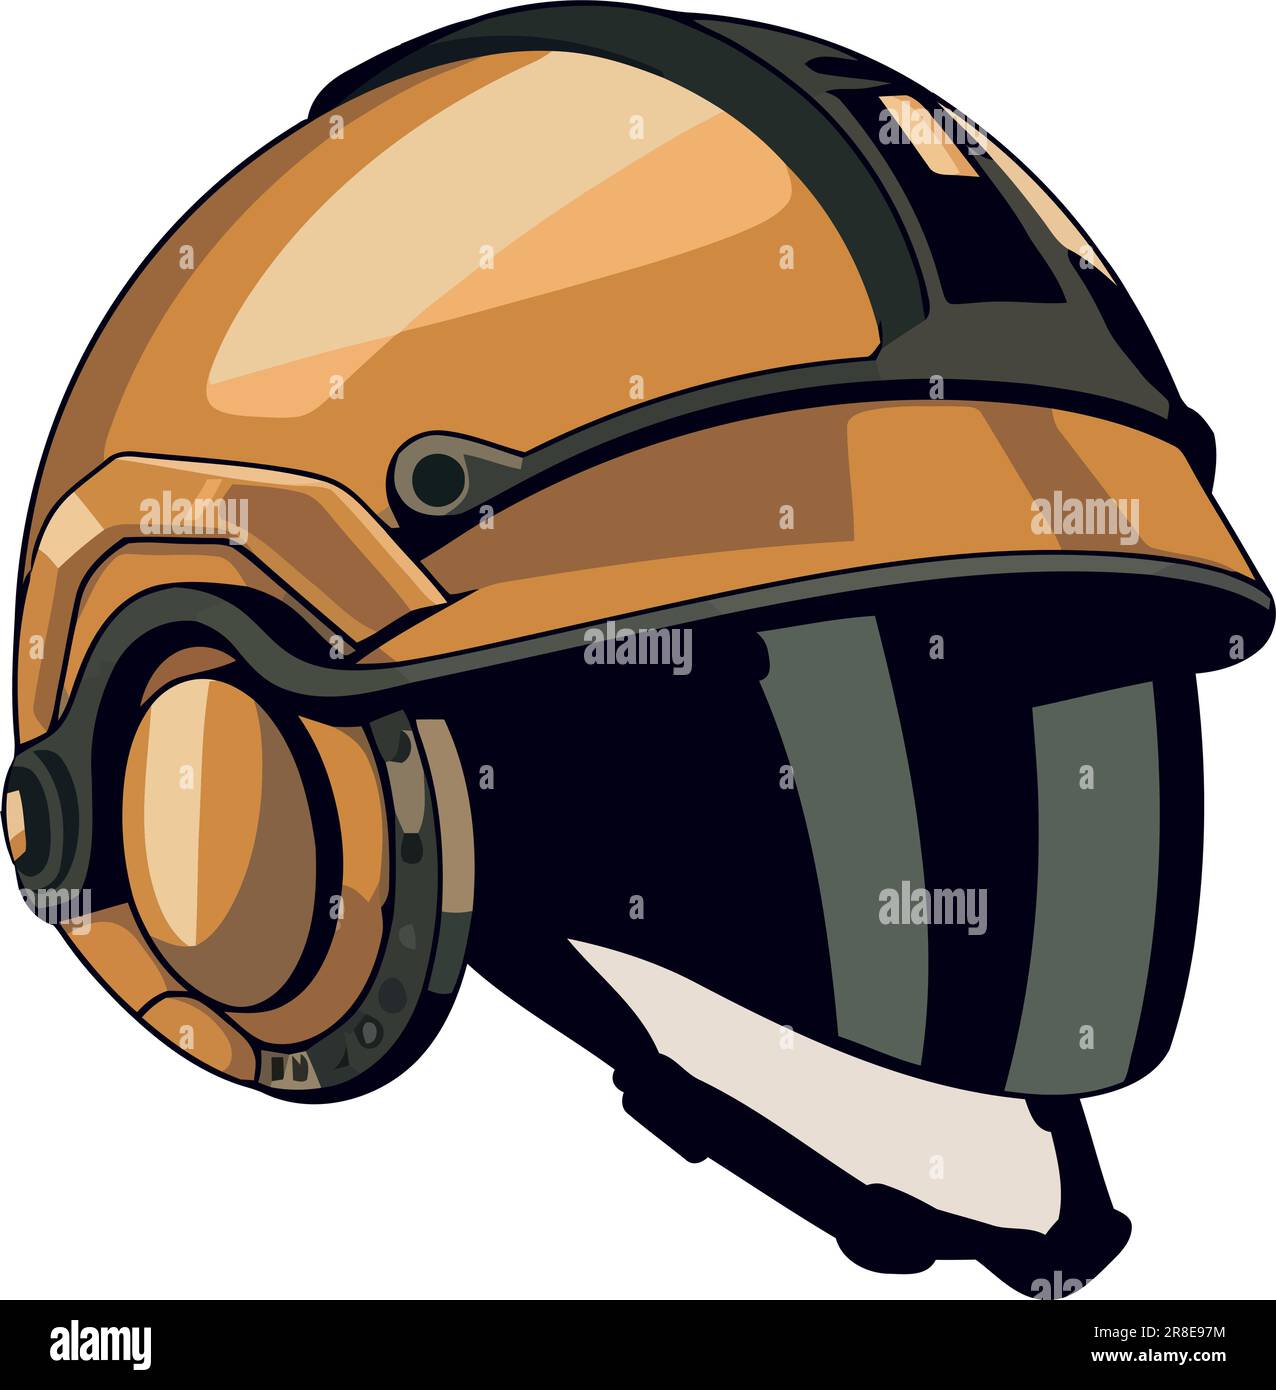 Helmet for safety in extreme sports over white Stock Vector